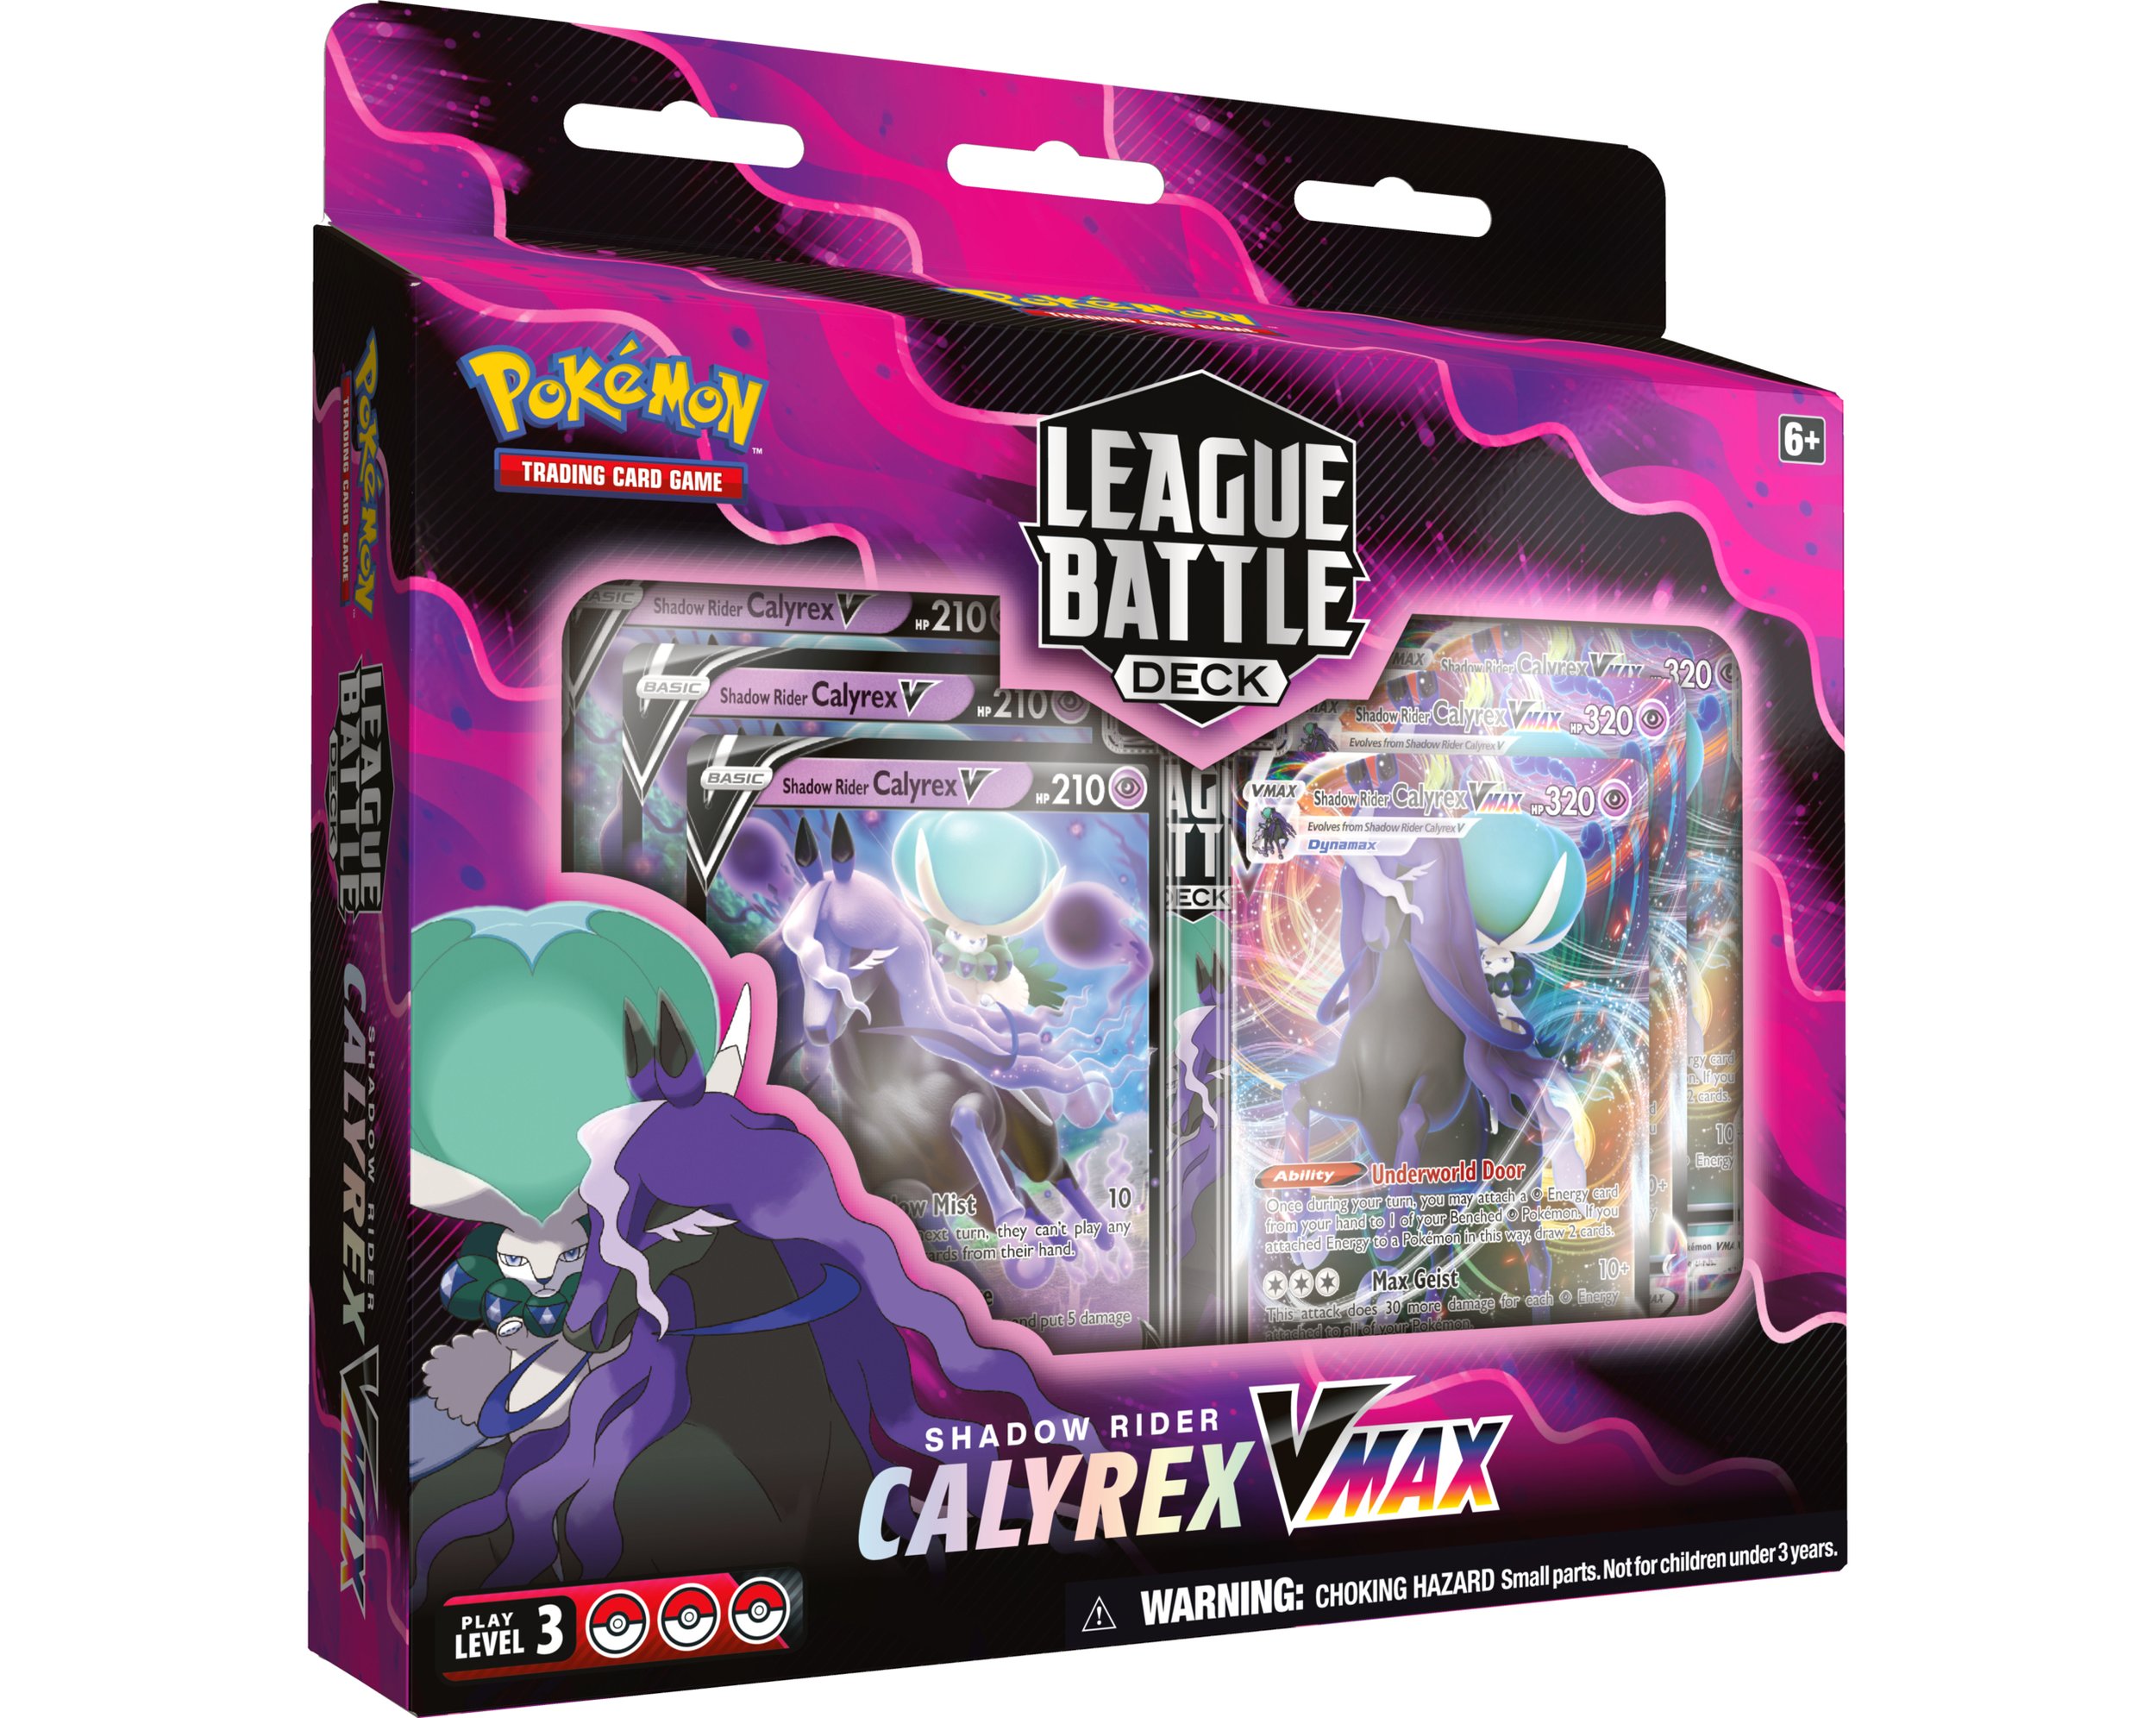 The Best Cards From Pokemon TCG Fusion Strike! (Mew VMAX, Genesect V,  Gengar VMAX, & More!) 